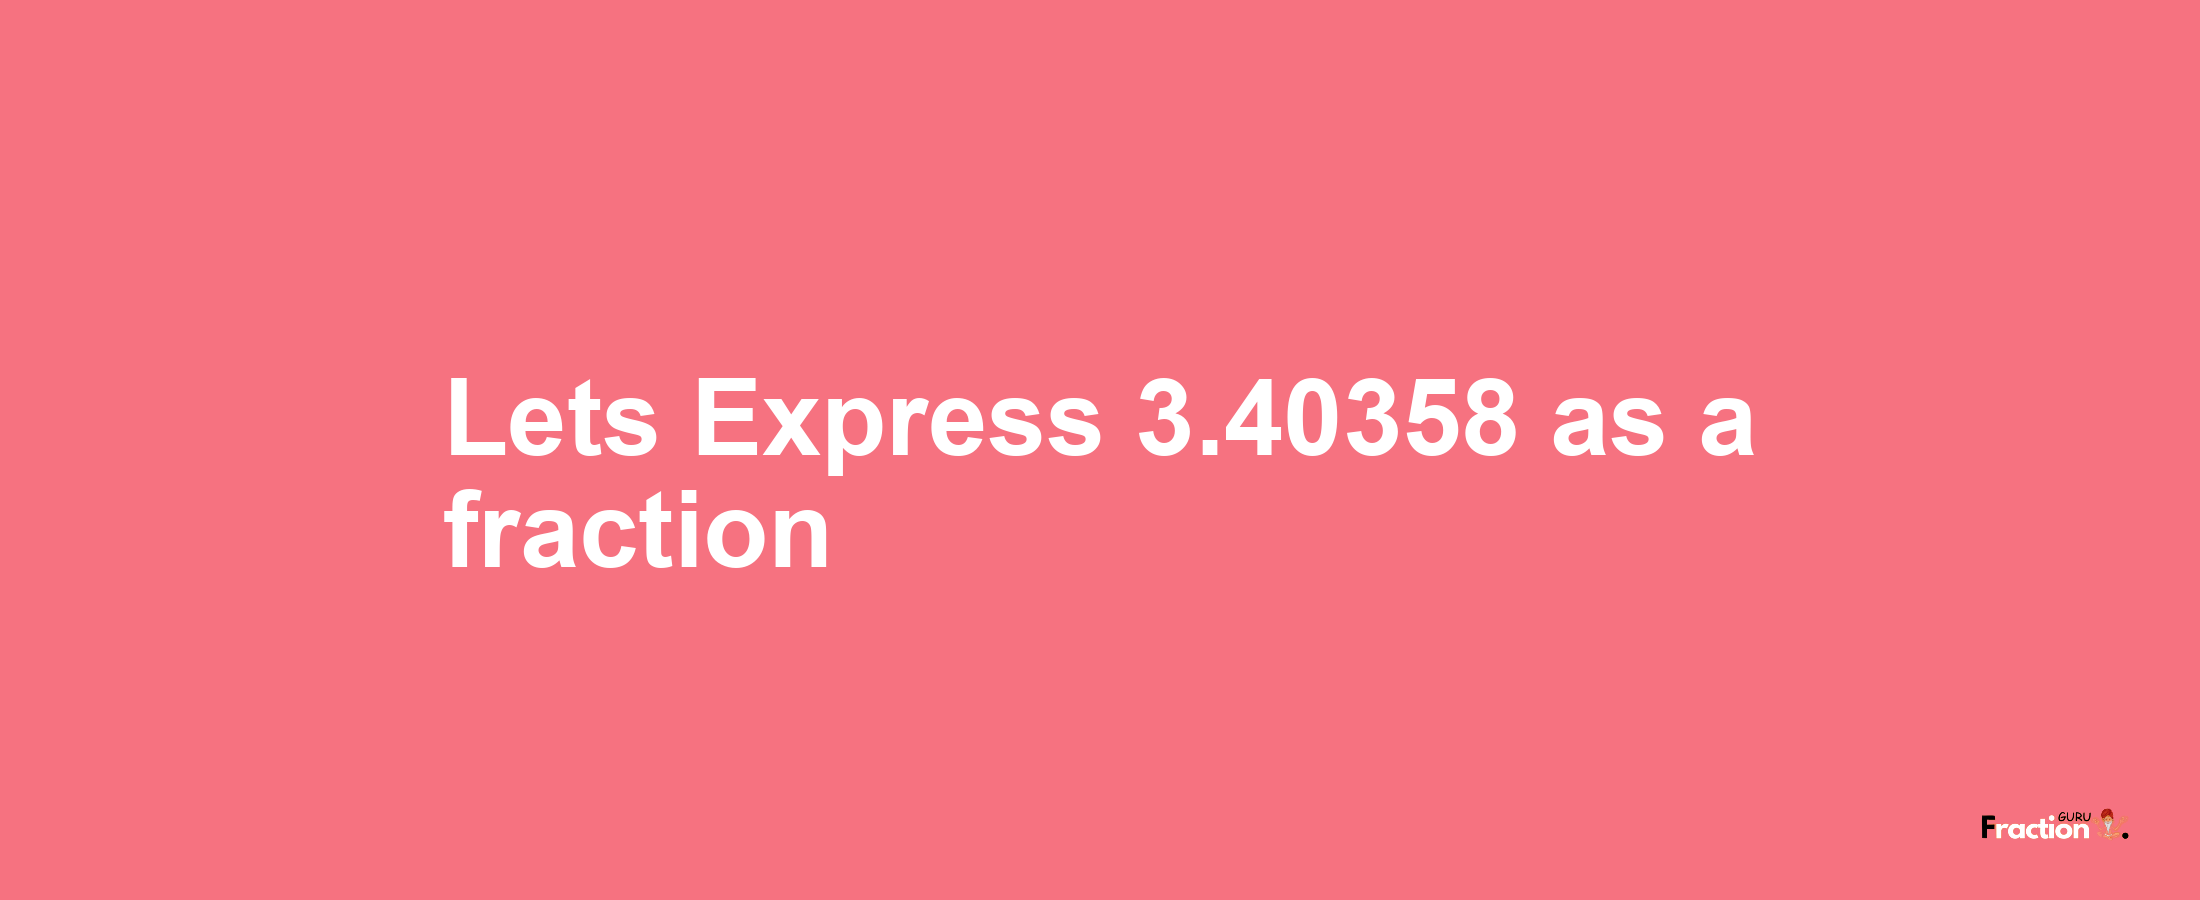 Lets Express 3.40358 as afraction